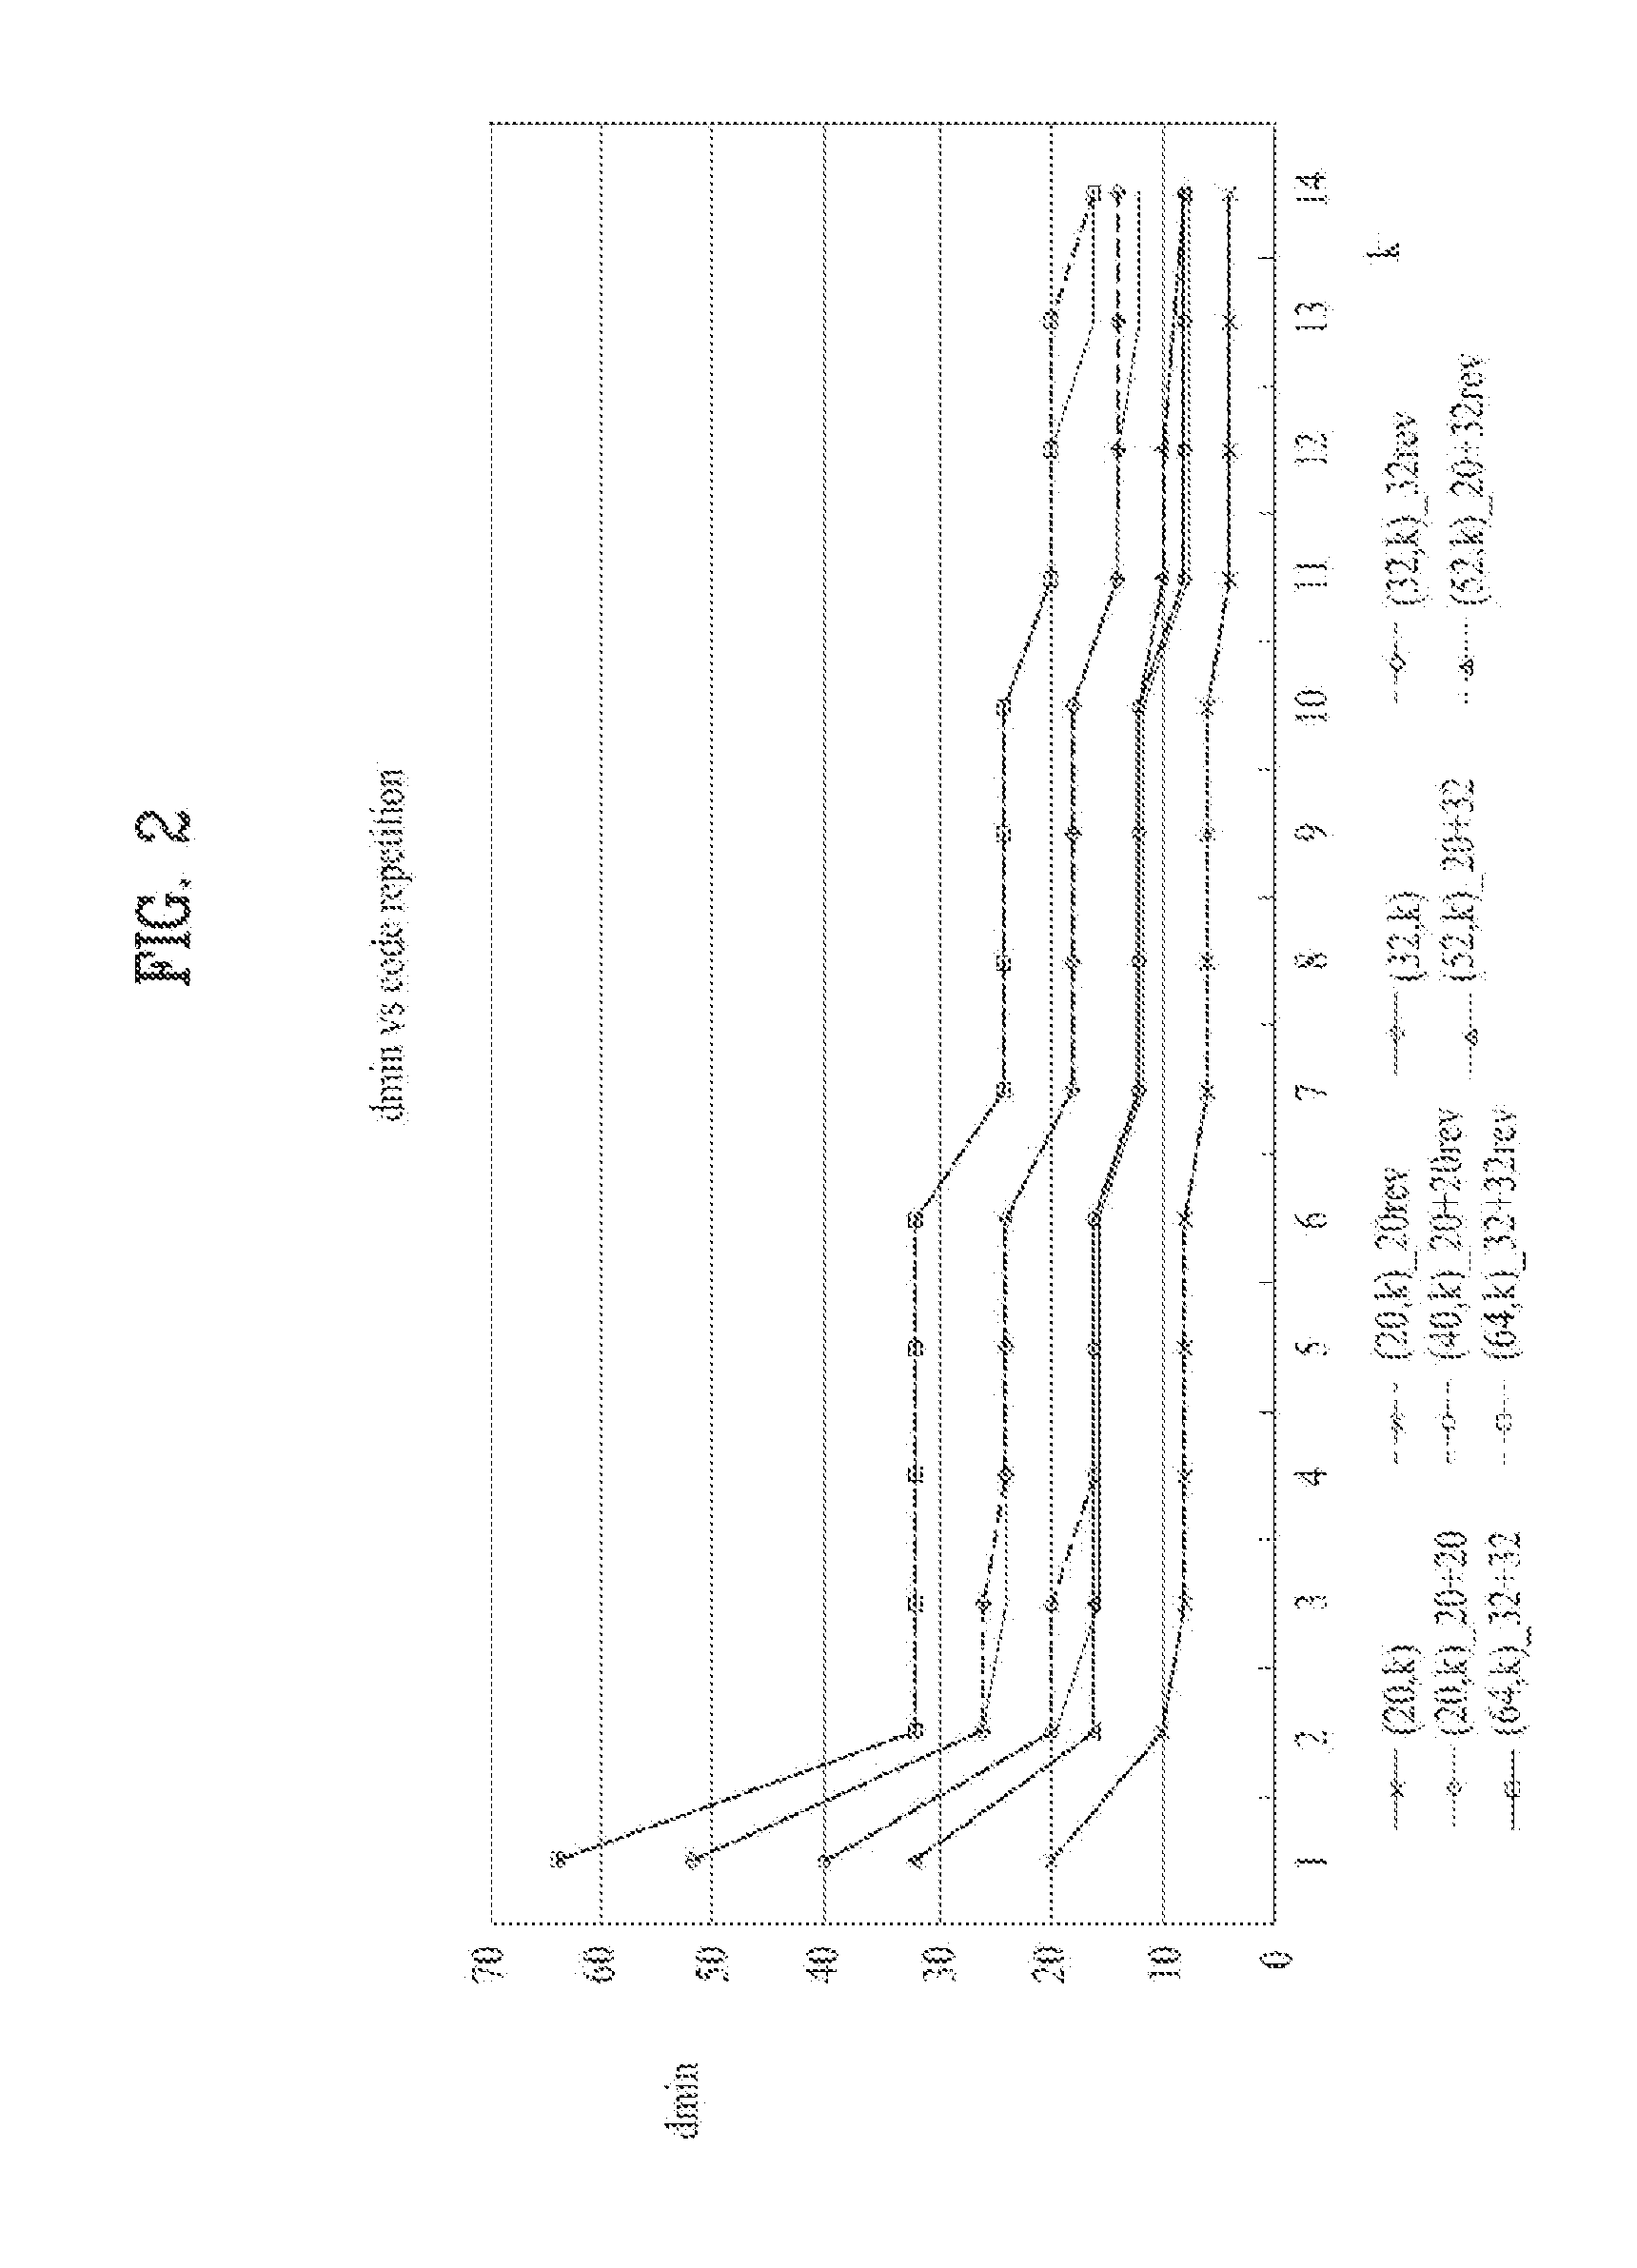 Channel coding method of variable length information using block code